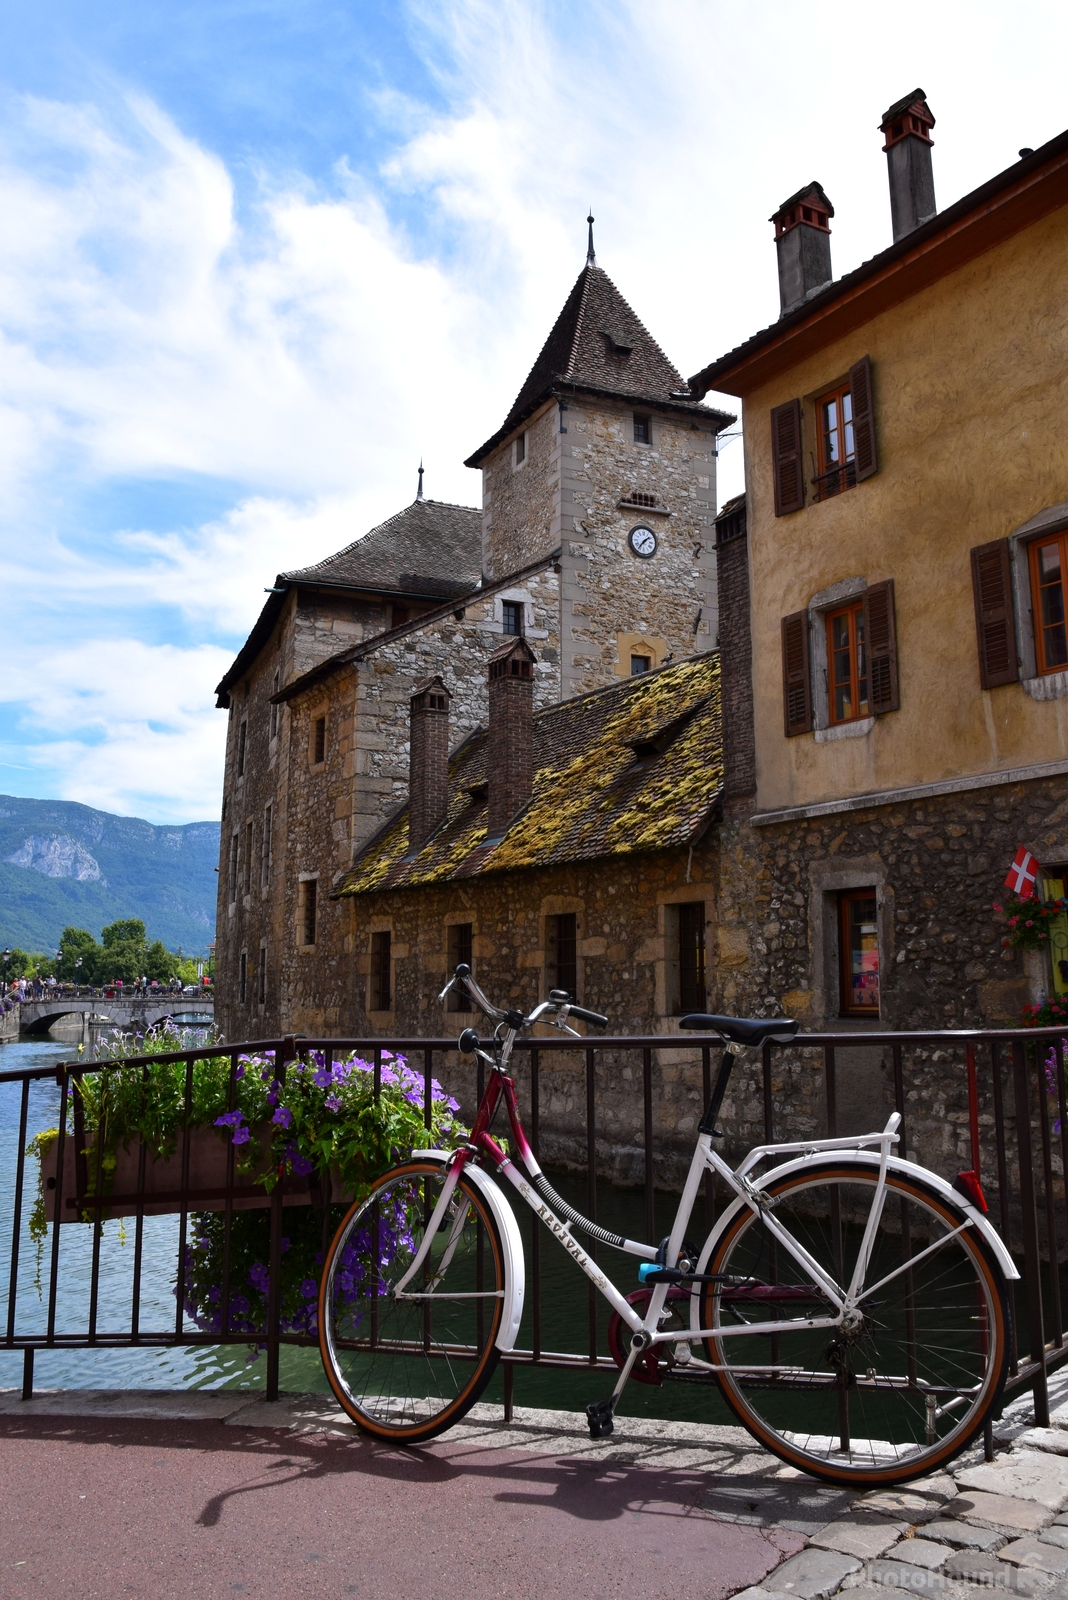 Image of View of the Old Jail of Annecy by Florent MOMAL